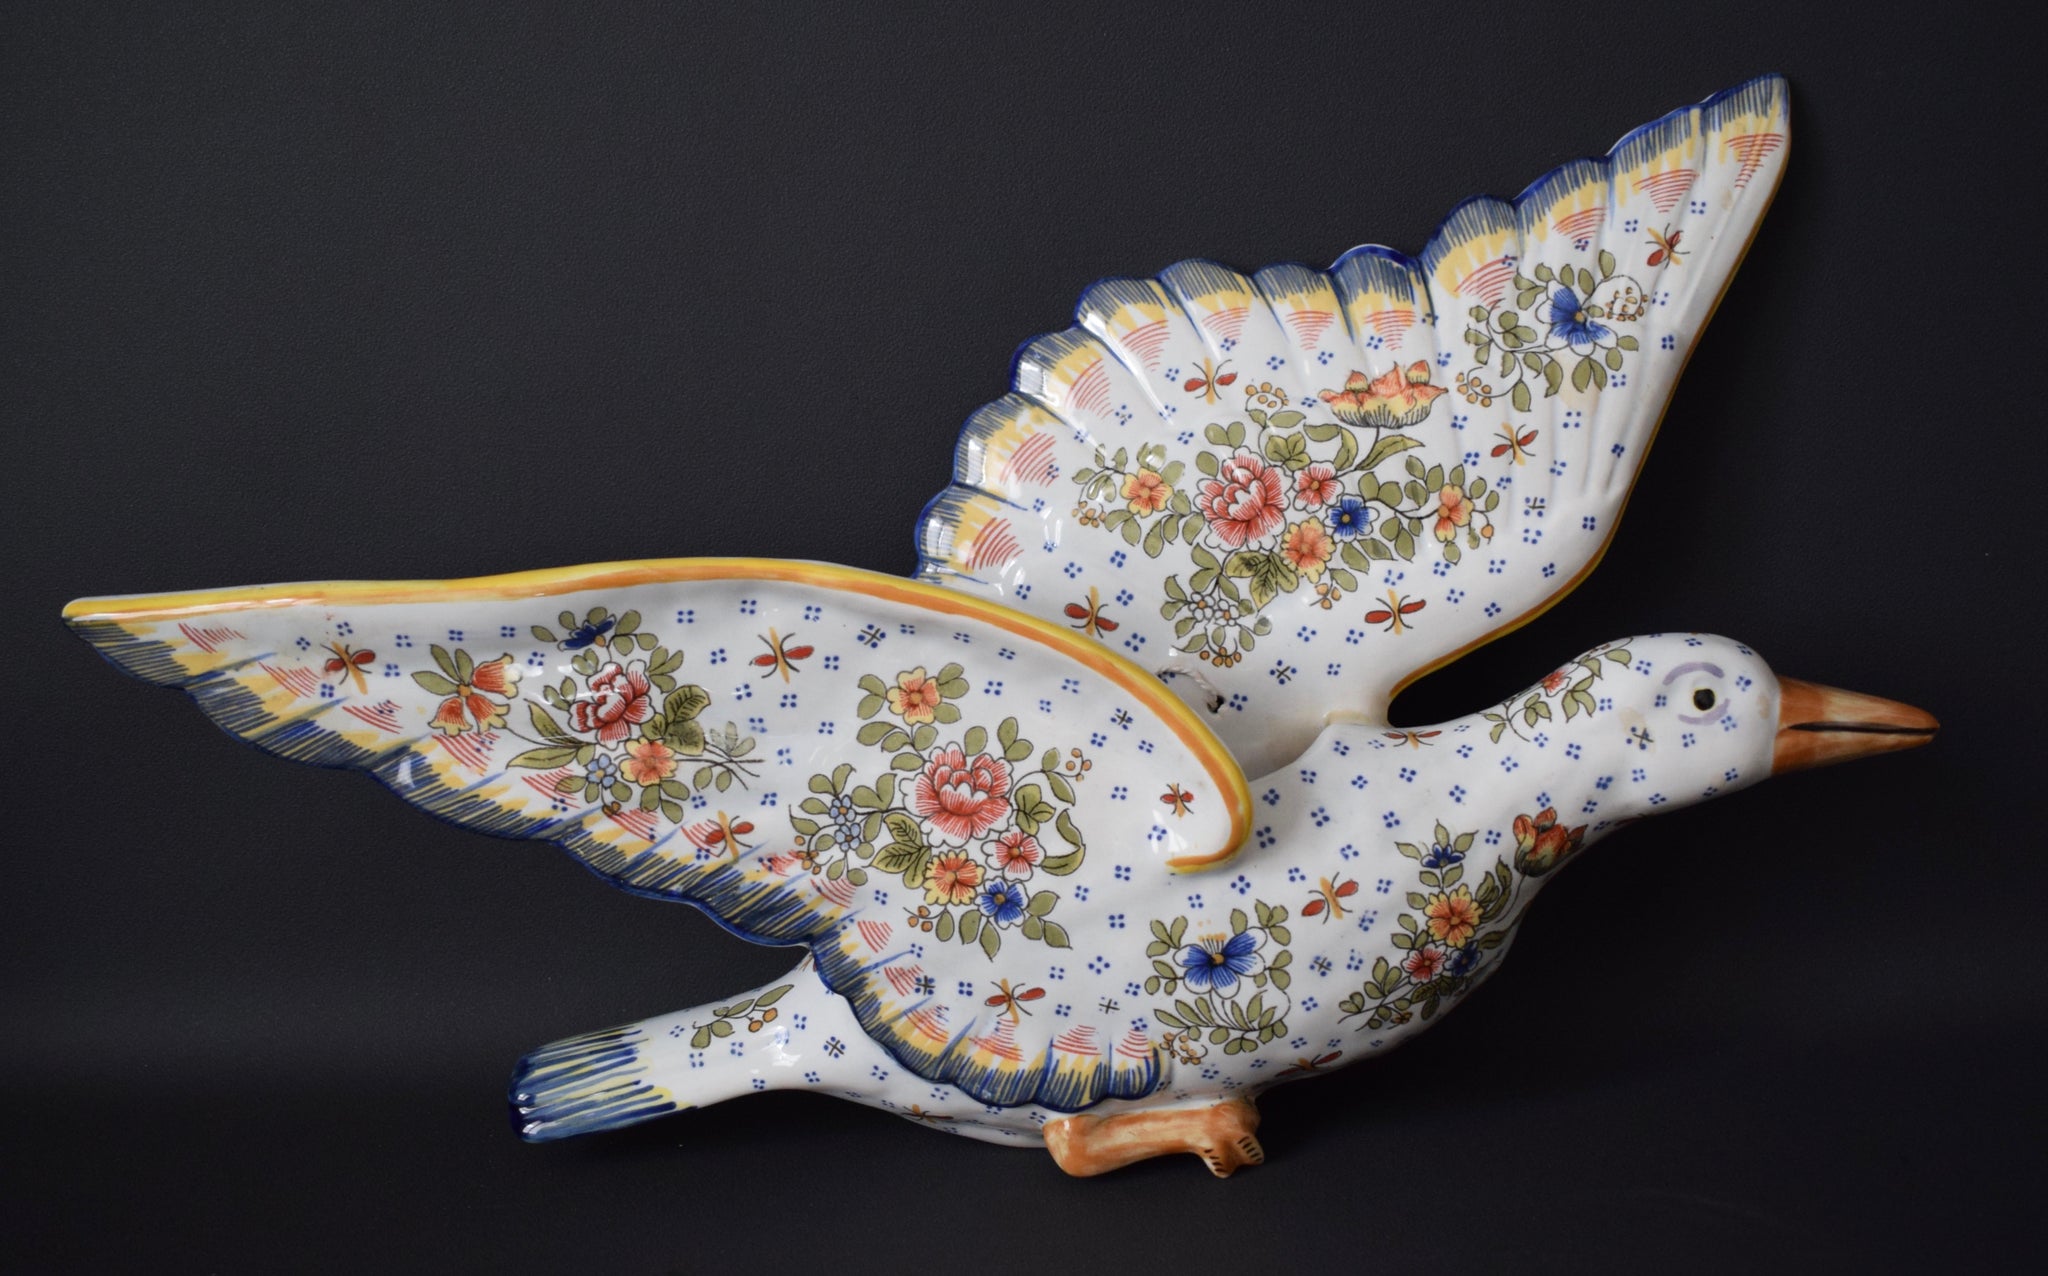 Rare Pair of Gooses Wall Pocket French Antique Hand Painted Desvres Fourmaintraux Rouen Decor - Majolica Figural Flower Wall Vases